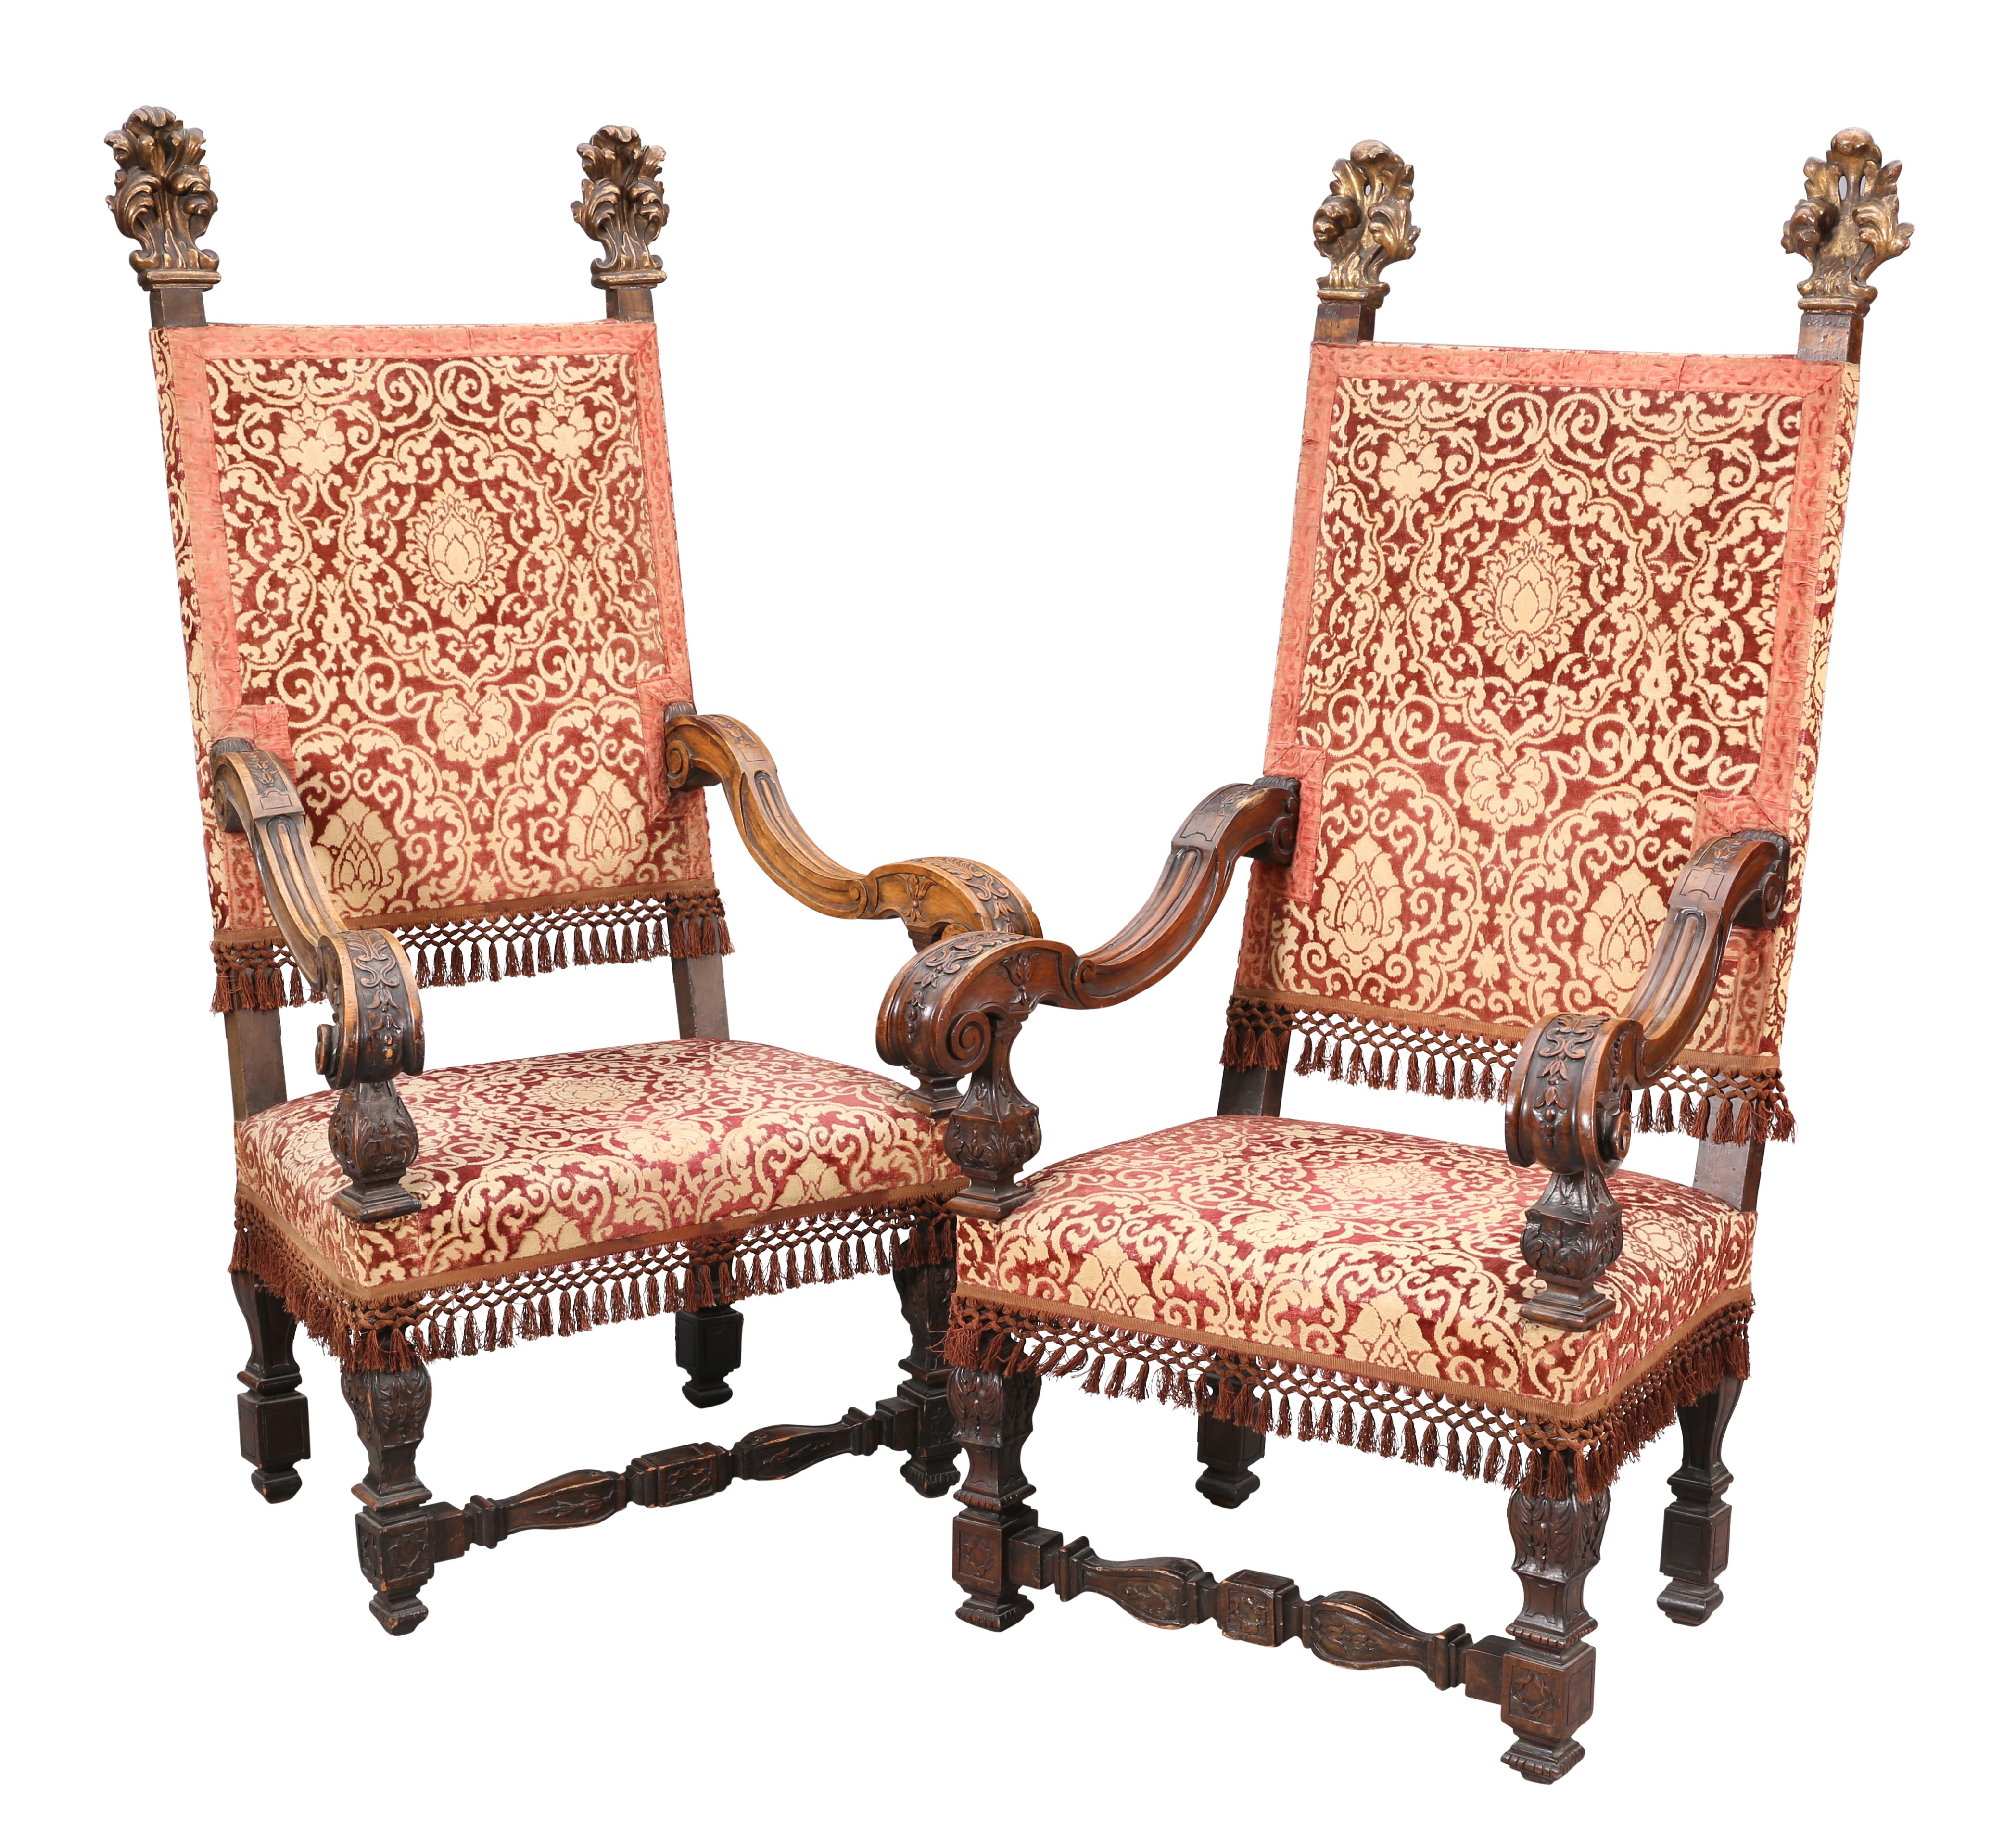 A LARGE PAIR OF GILDED AND CARVED "THRONES"